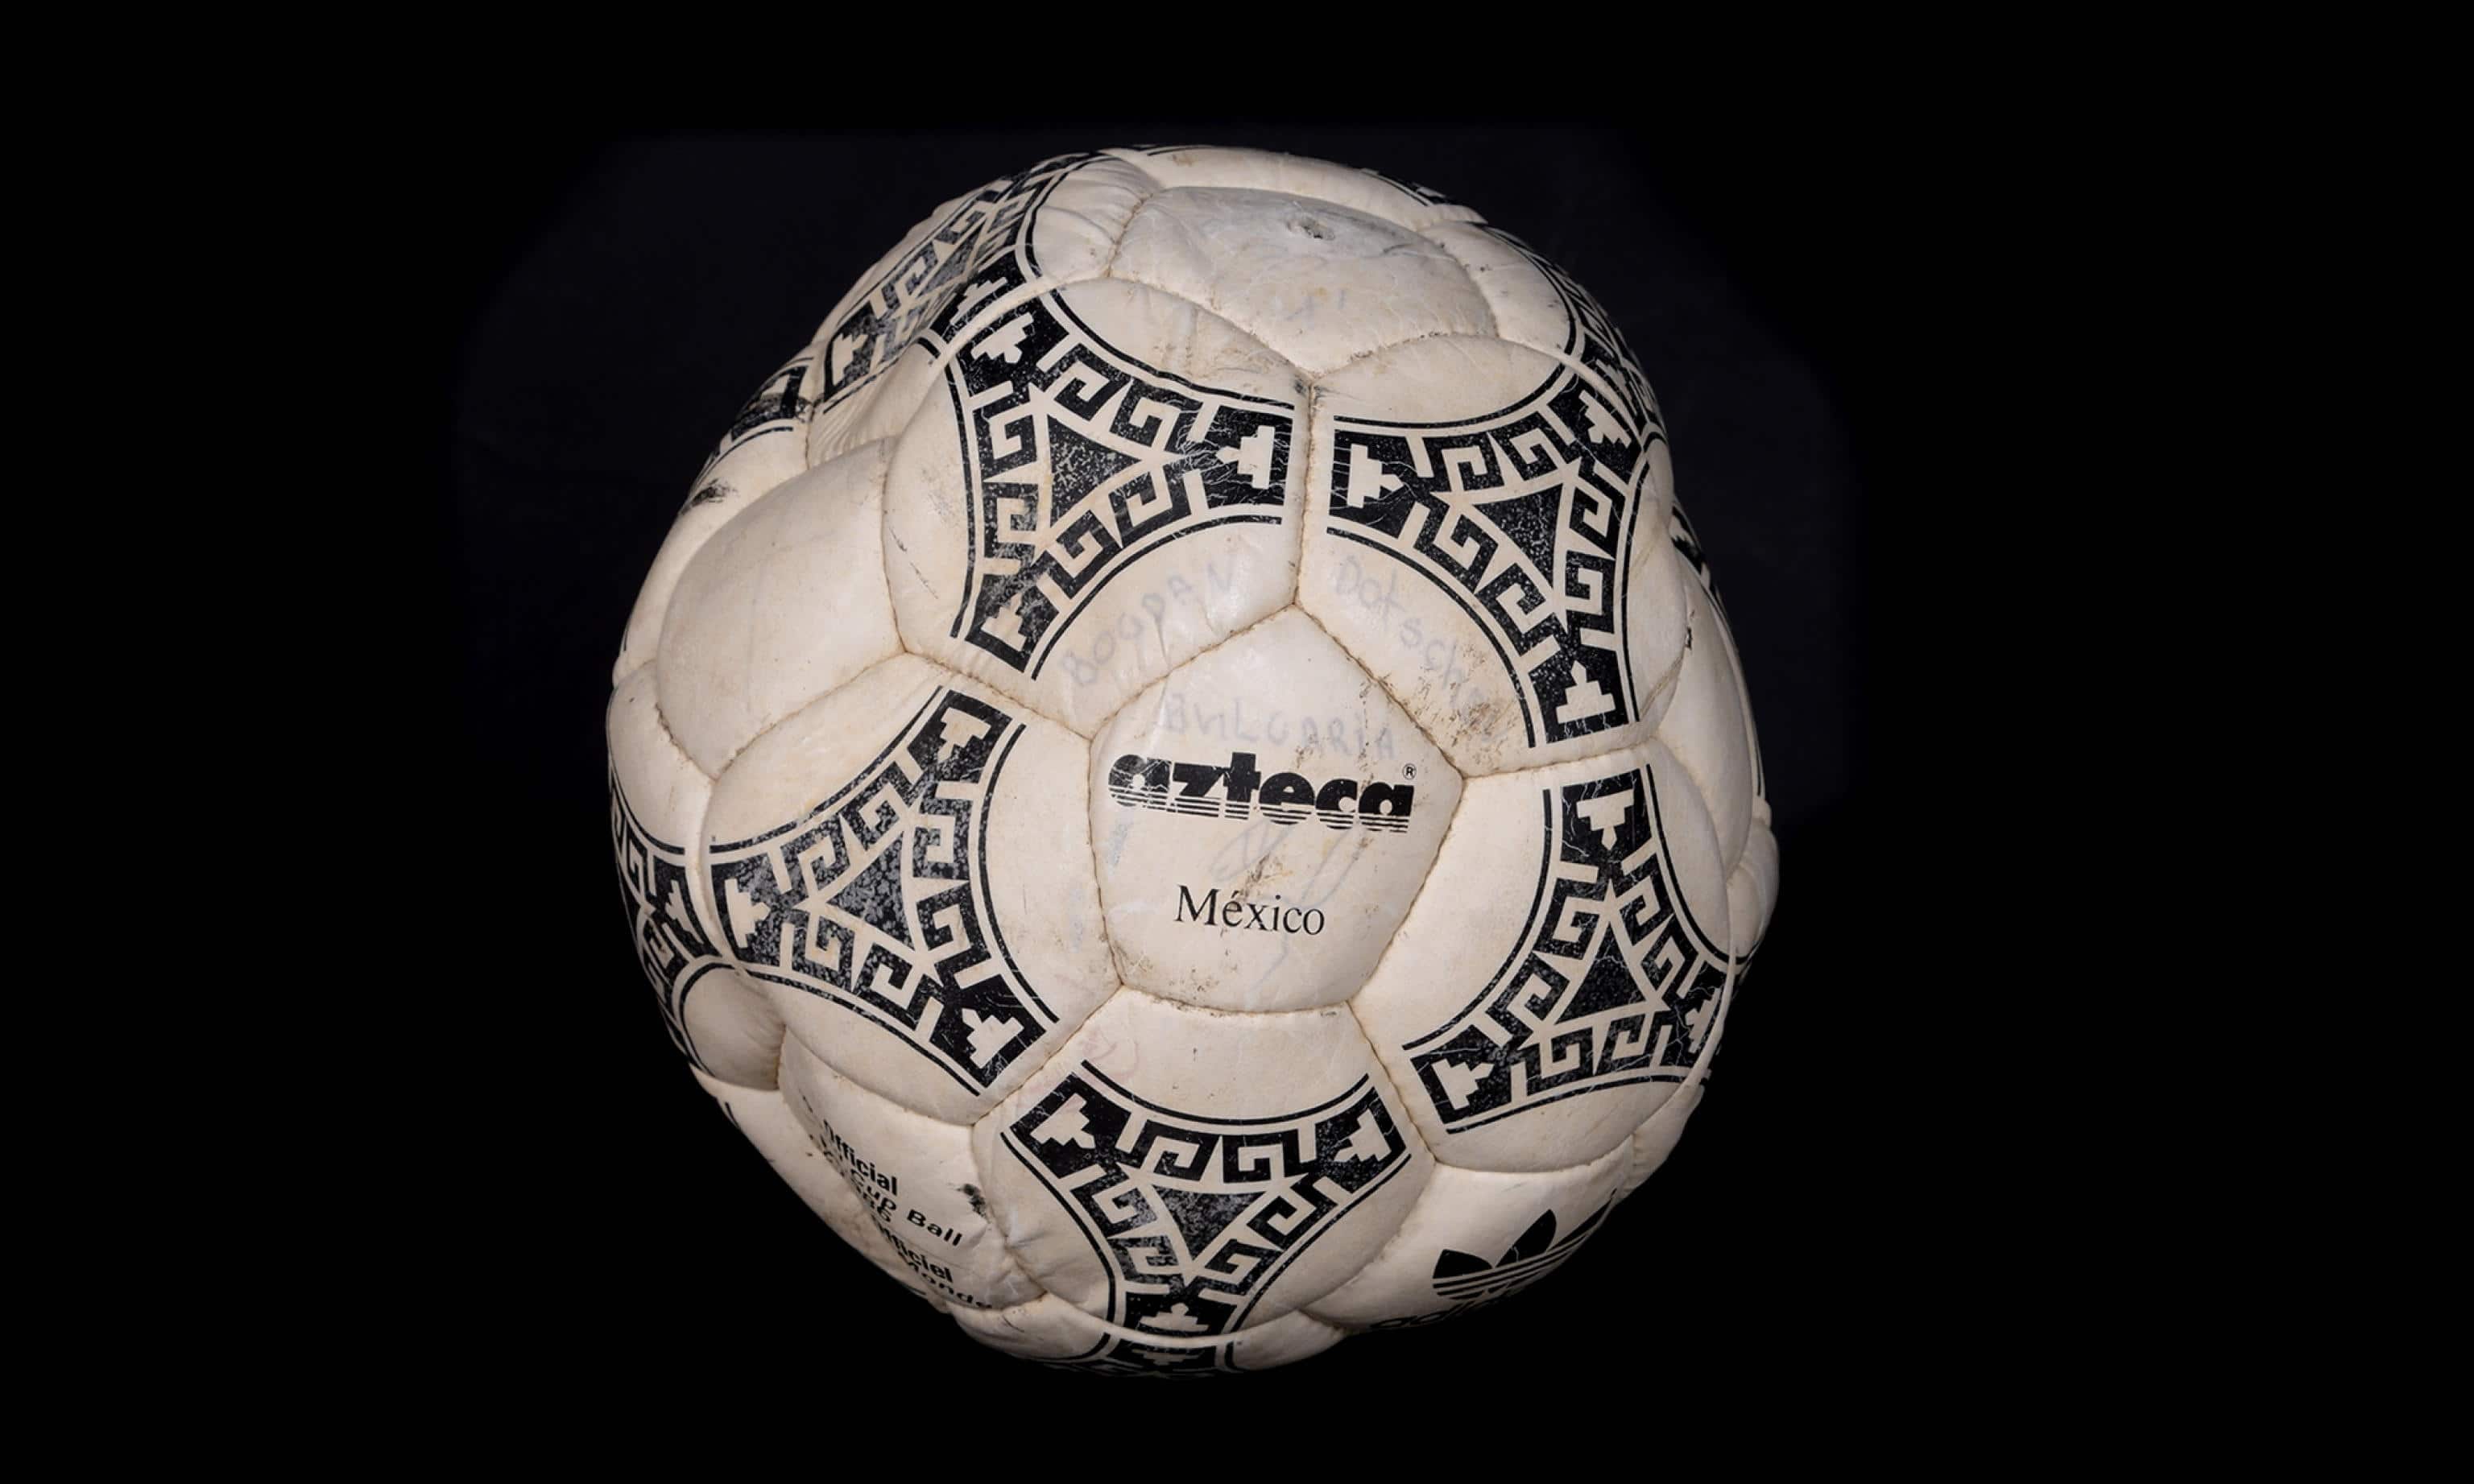 epa10243057 An undated handout photo made available by Graham Budd Auctions of the "Hand of God ball" in Wellingborough, Britain, 14 October 2022. The ball that was used to score one of the most controversial goals in football history is being sold by Ali Bin Nasser, the Tunisian referee who allowed the goal by Maradona in the FIFA 1986 World Cup quarter finals between Argentina and Argentina. The auction will take place on the 16 November 2022.  EPA/GRAHAM BUDD AUCTIONS HANDOUT MANDATORY CREDIT GRAHAM BUDD AUCTIONS HANDOUT HANDOUT EDITORIAL USE ONLY/NO SALES